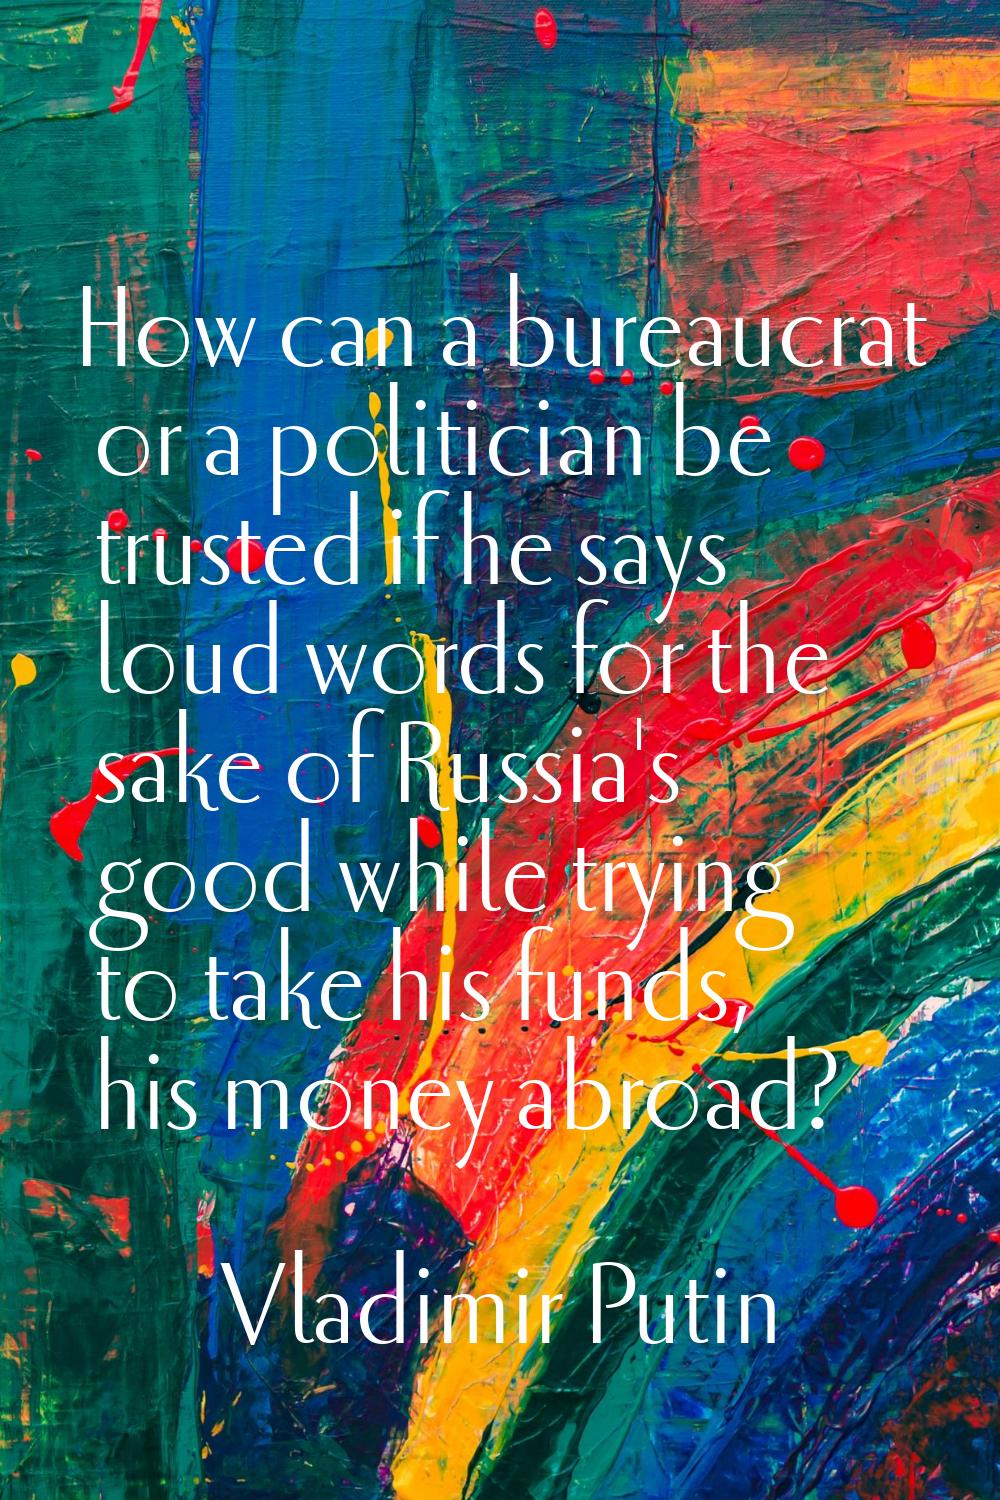 How can a bureaucrat or a politician be trusted if he says loud words for the sake of Russia's good